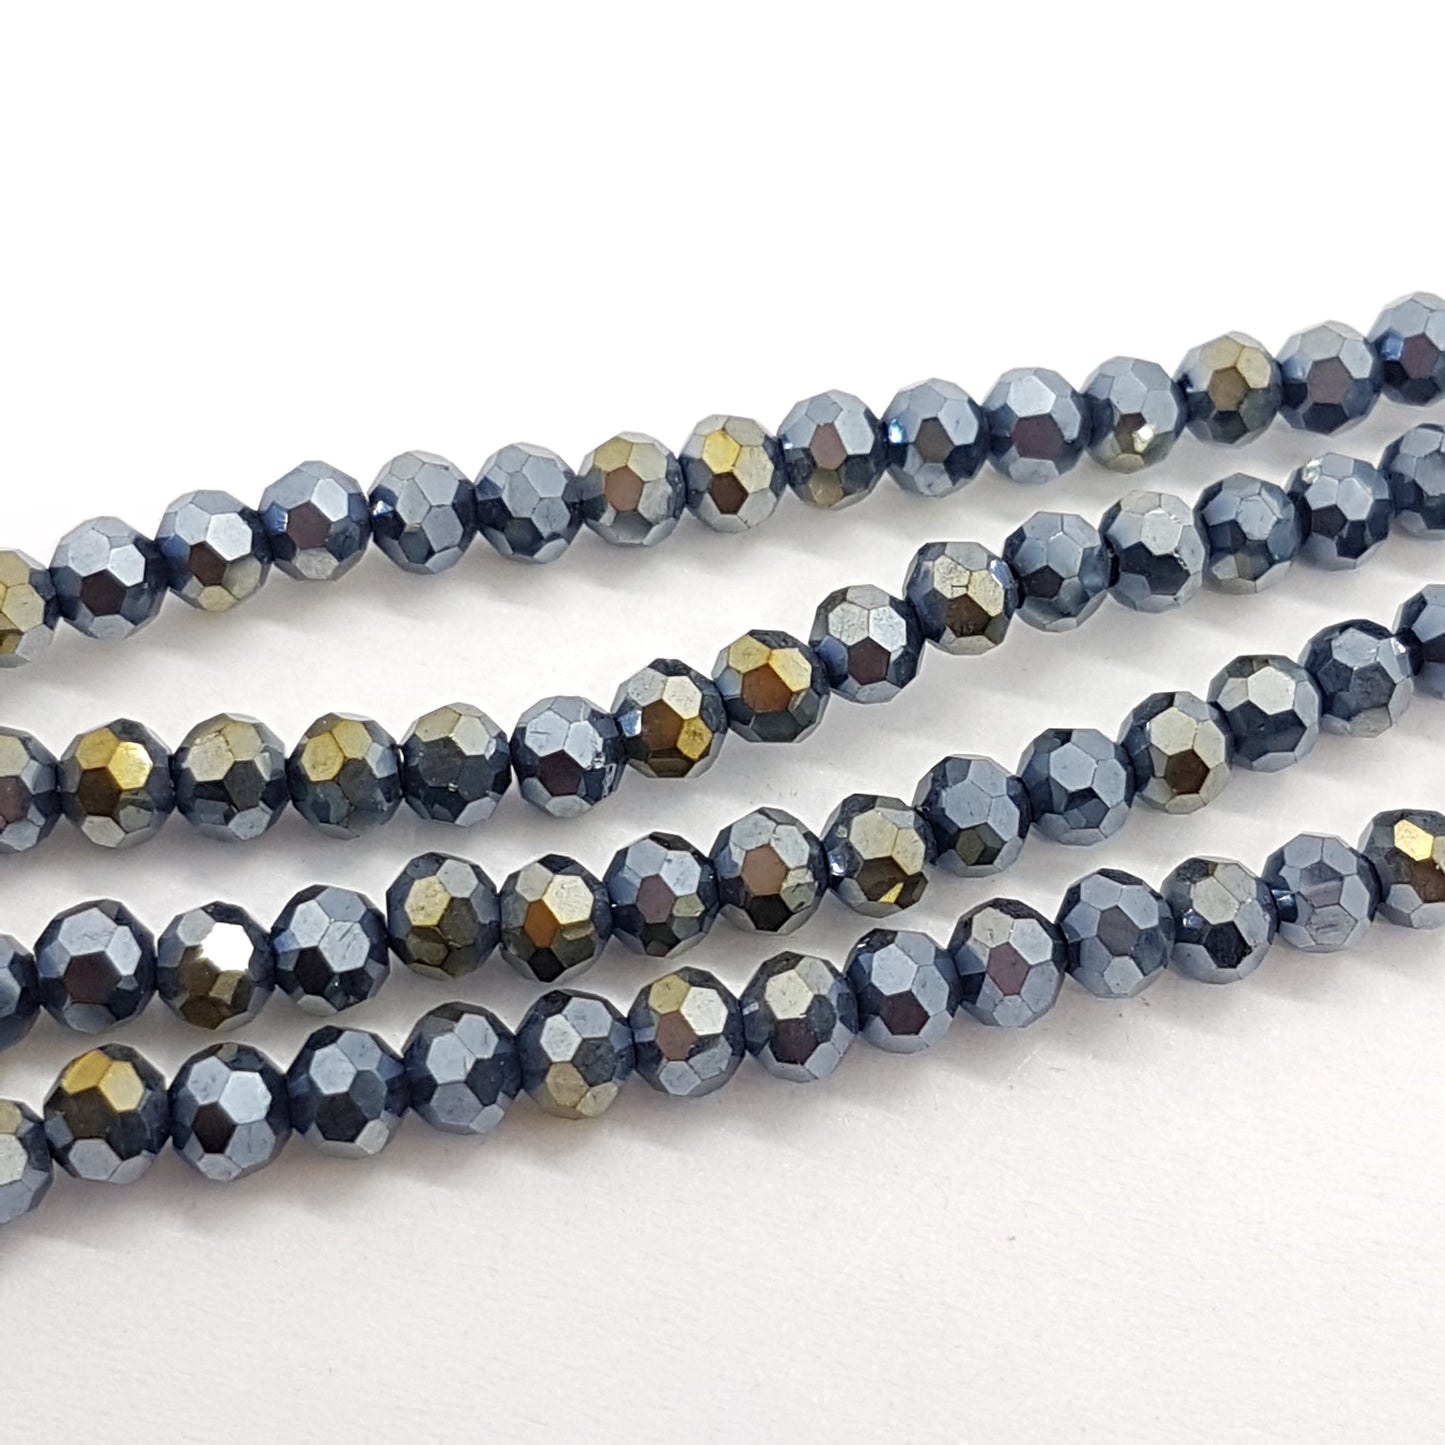 Black AB Faceted Round Crystal Beads